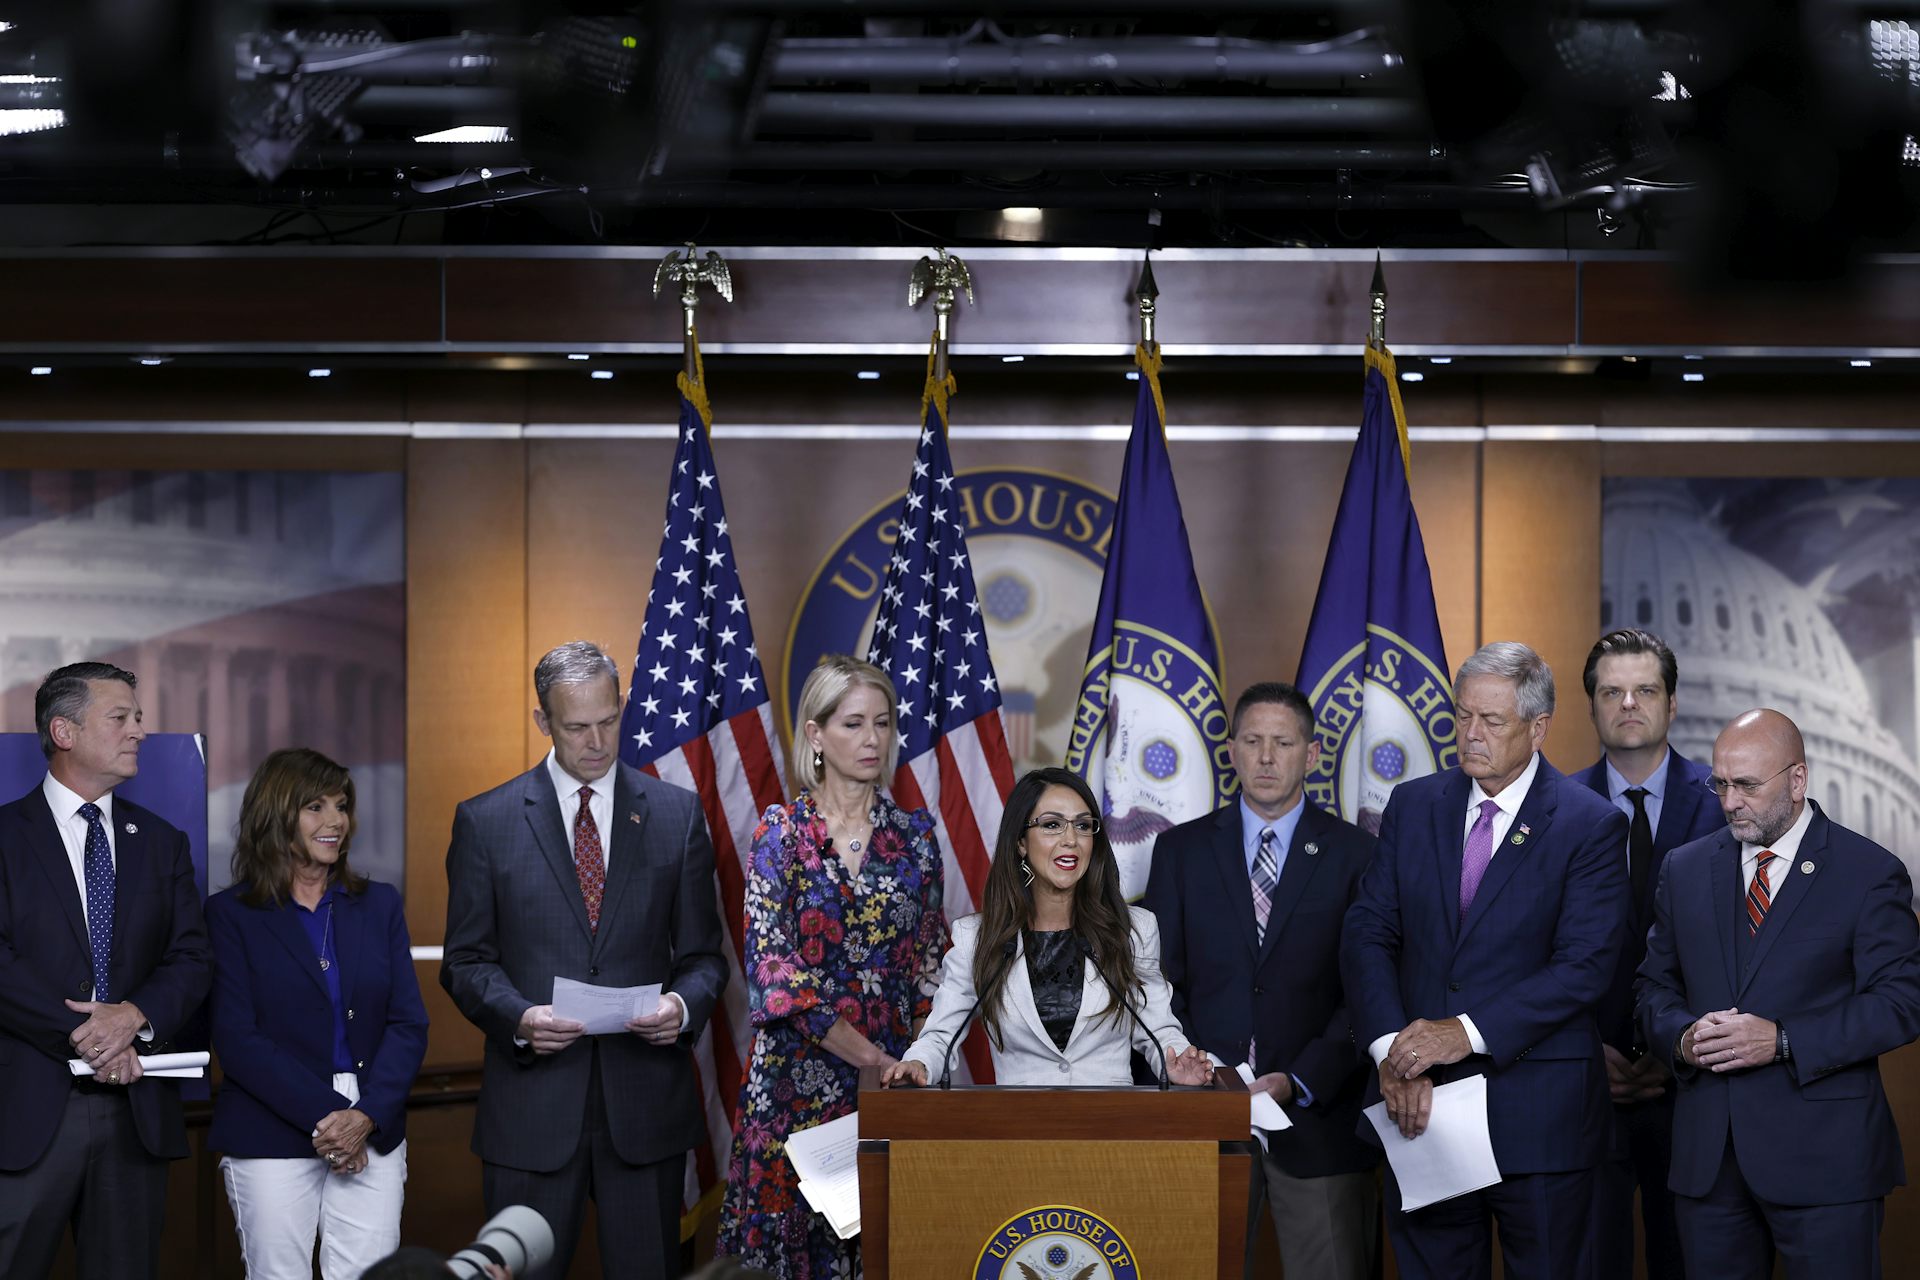 A woman with long dark hair, wearing eye glasses and a white suit speaks from a lectern. Standing behind her are suited men and women, some holding papers in their hands.